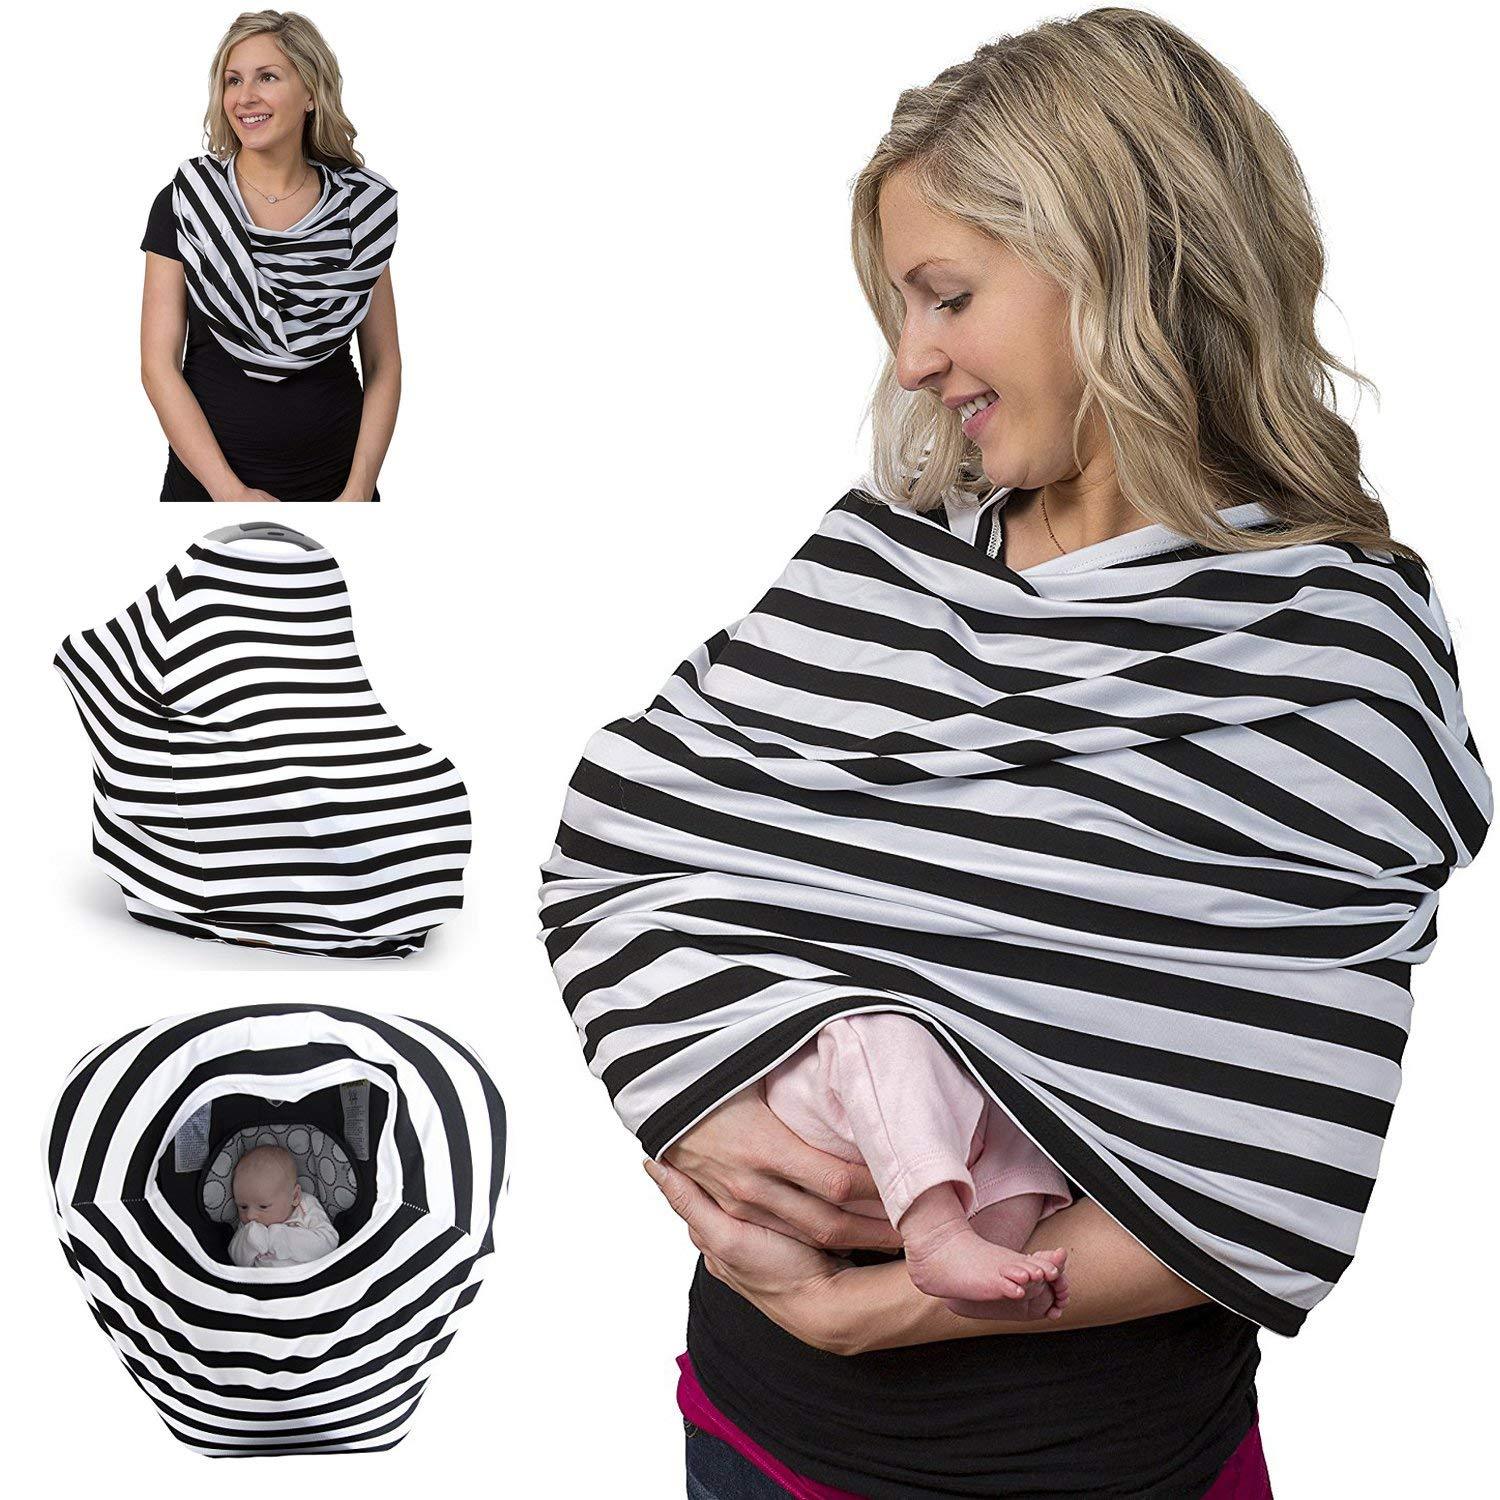 Multi-use Infinity Shawl Breastfeeding Cover & Nursing Scarf Covers For Baby Carrier Car Seat, Stroller 1